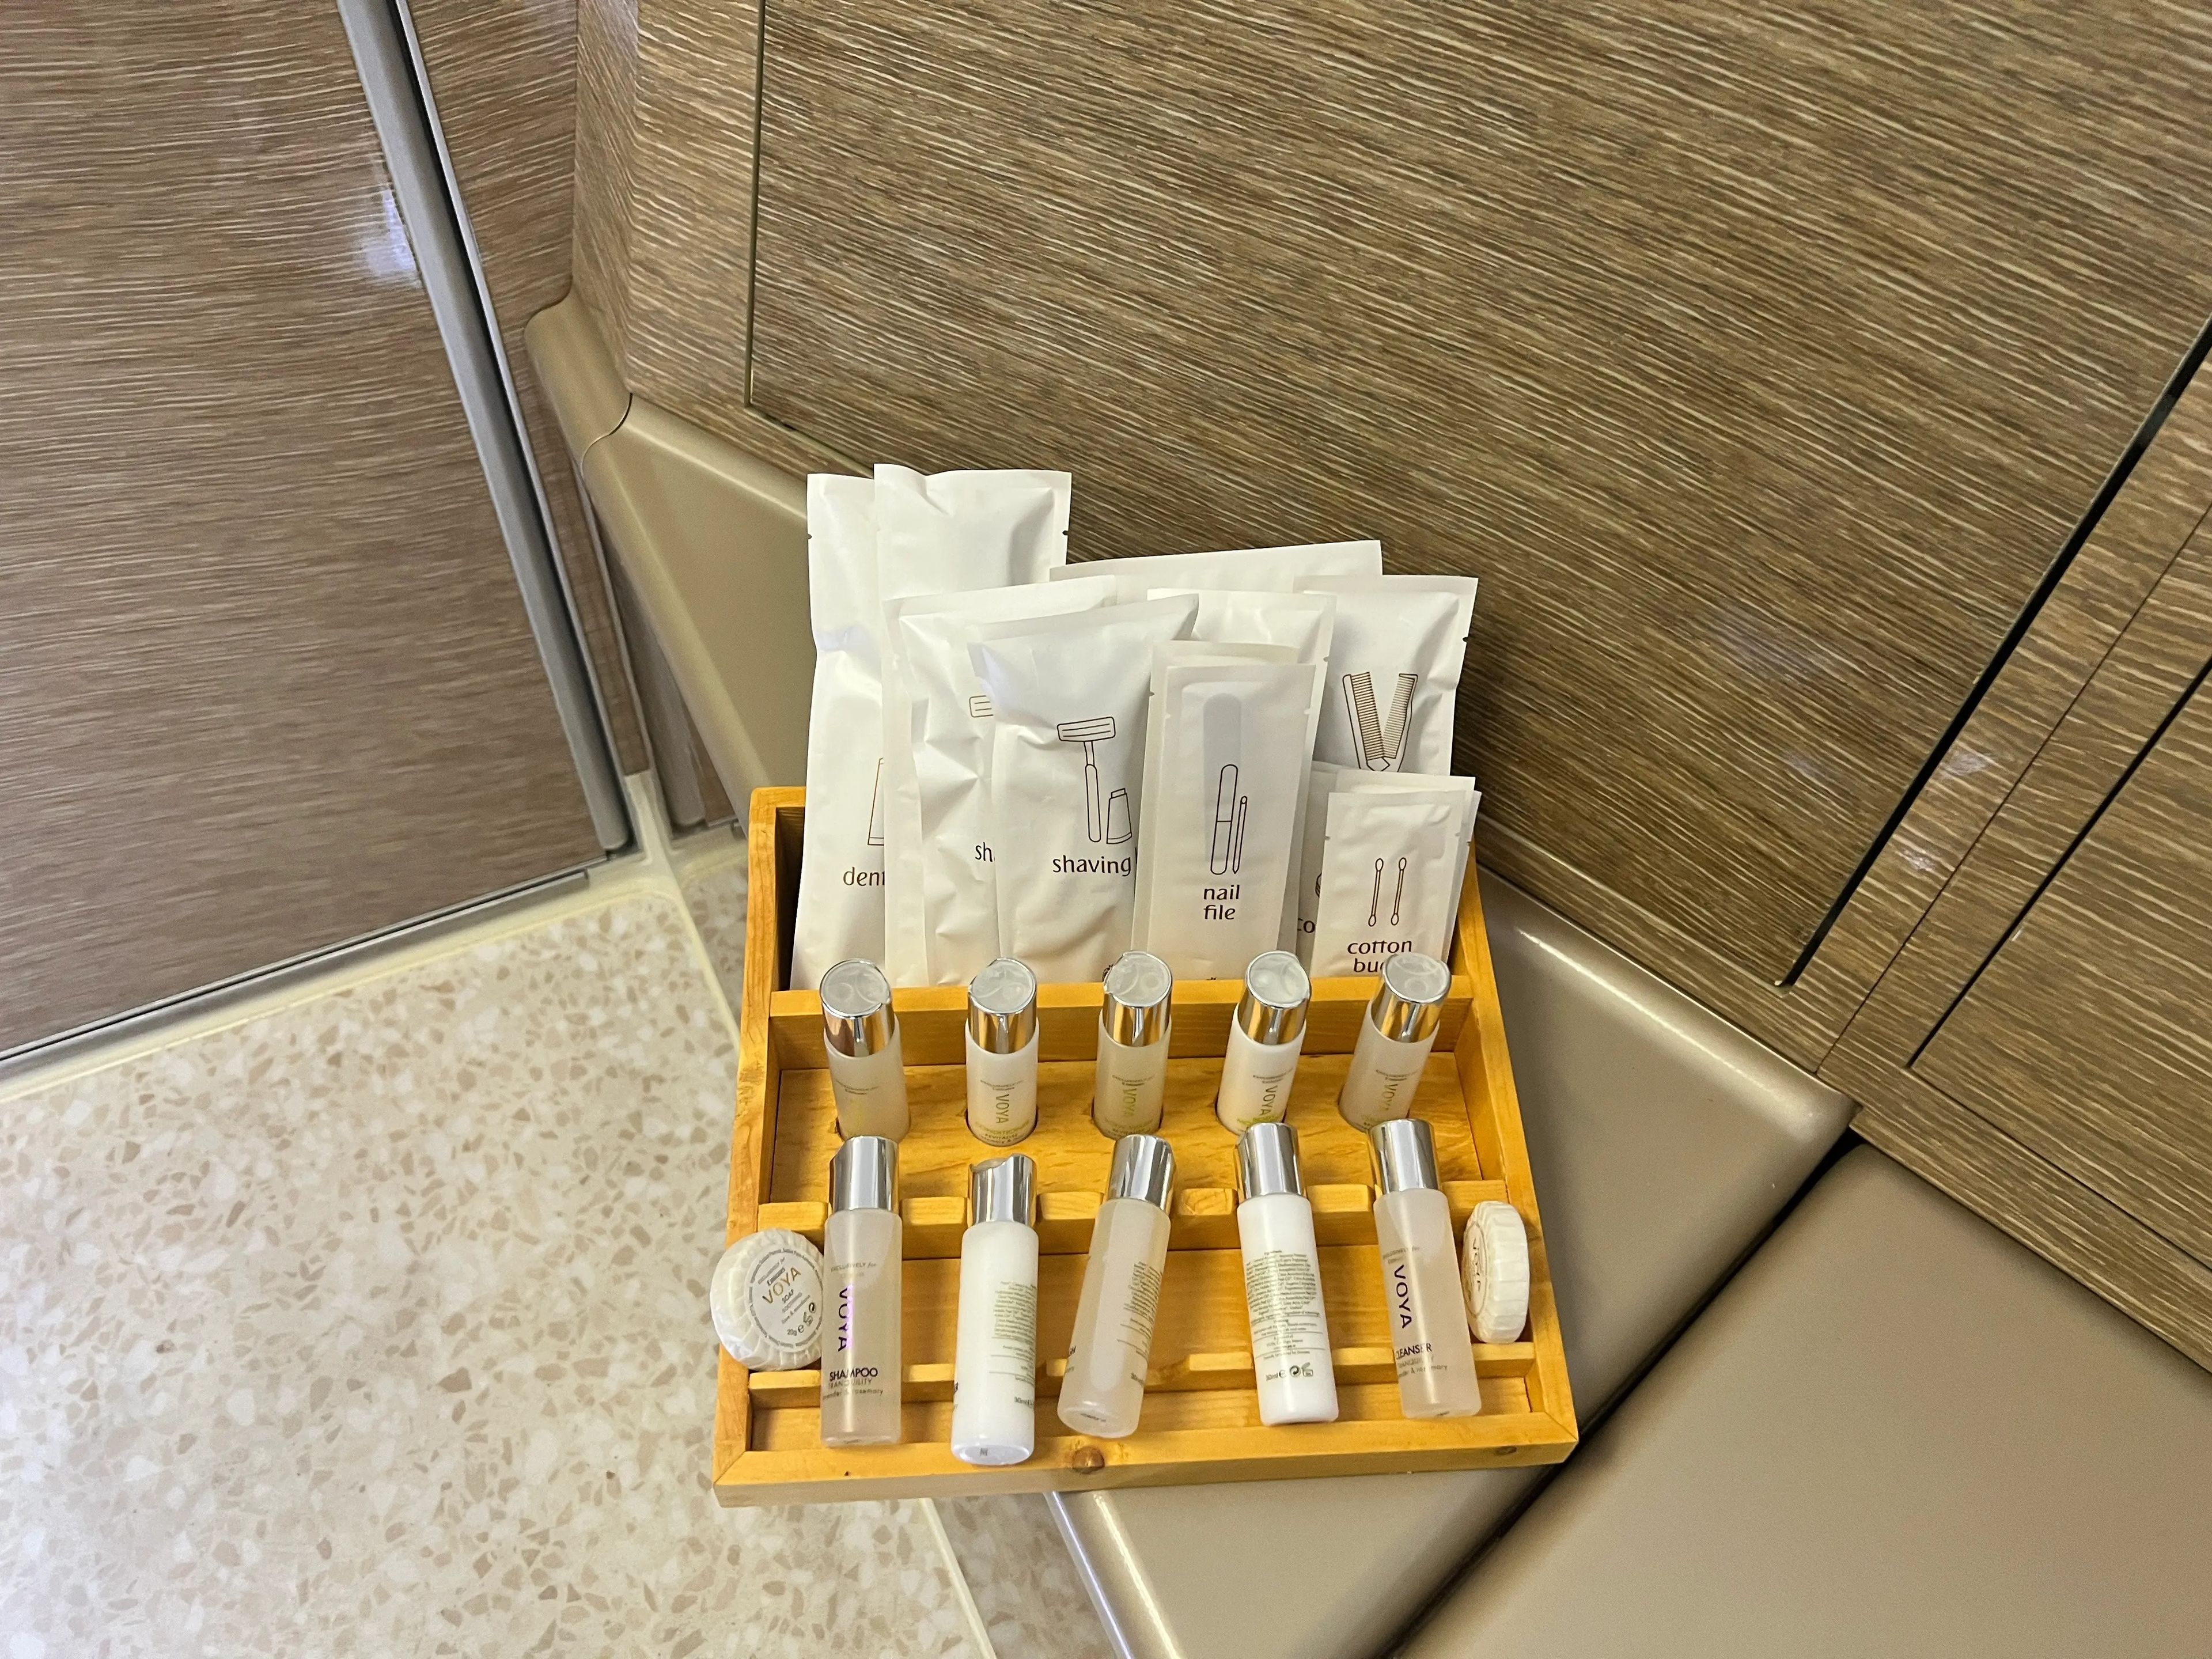 A close up of the hygiene amenities in white packages and bottles in A380 Emirates first class,